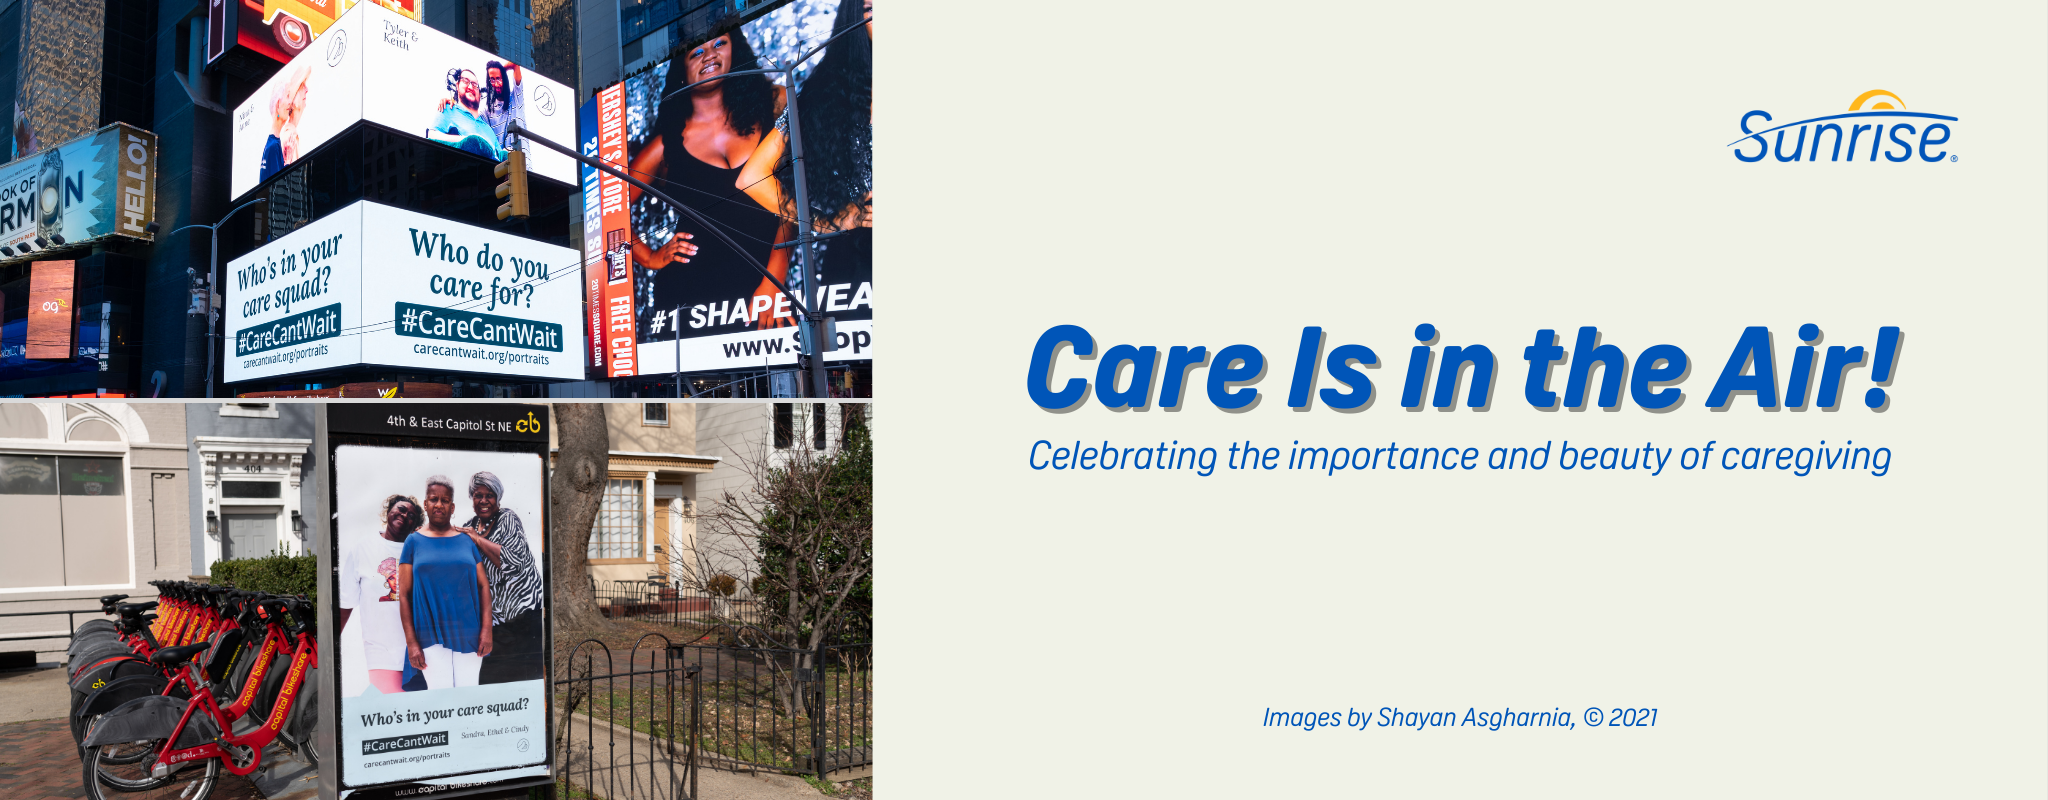 Blog Cover with the title "Care is in the air" and a subheading that says "Celebrating the importance and beauty of caregiving." To the left there are two images of advertisements in Times Square and Washington D.C. The photos are of people with their caregivers.